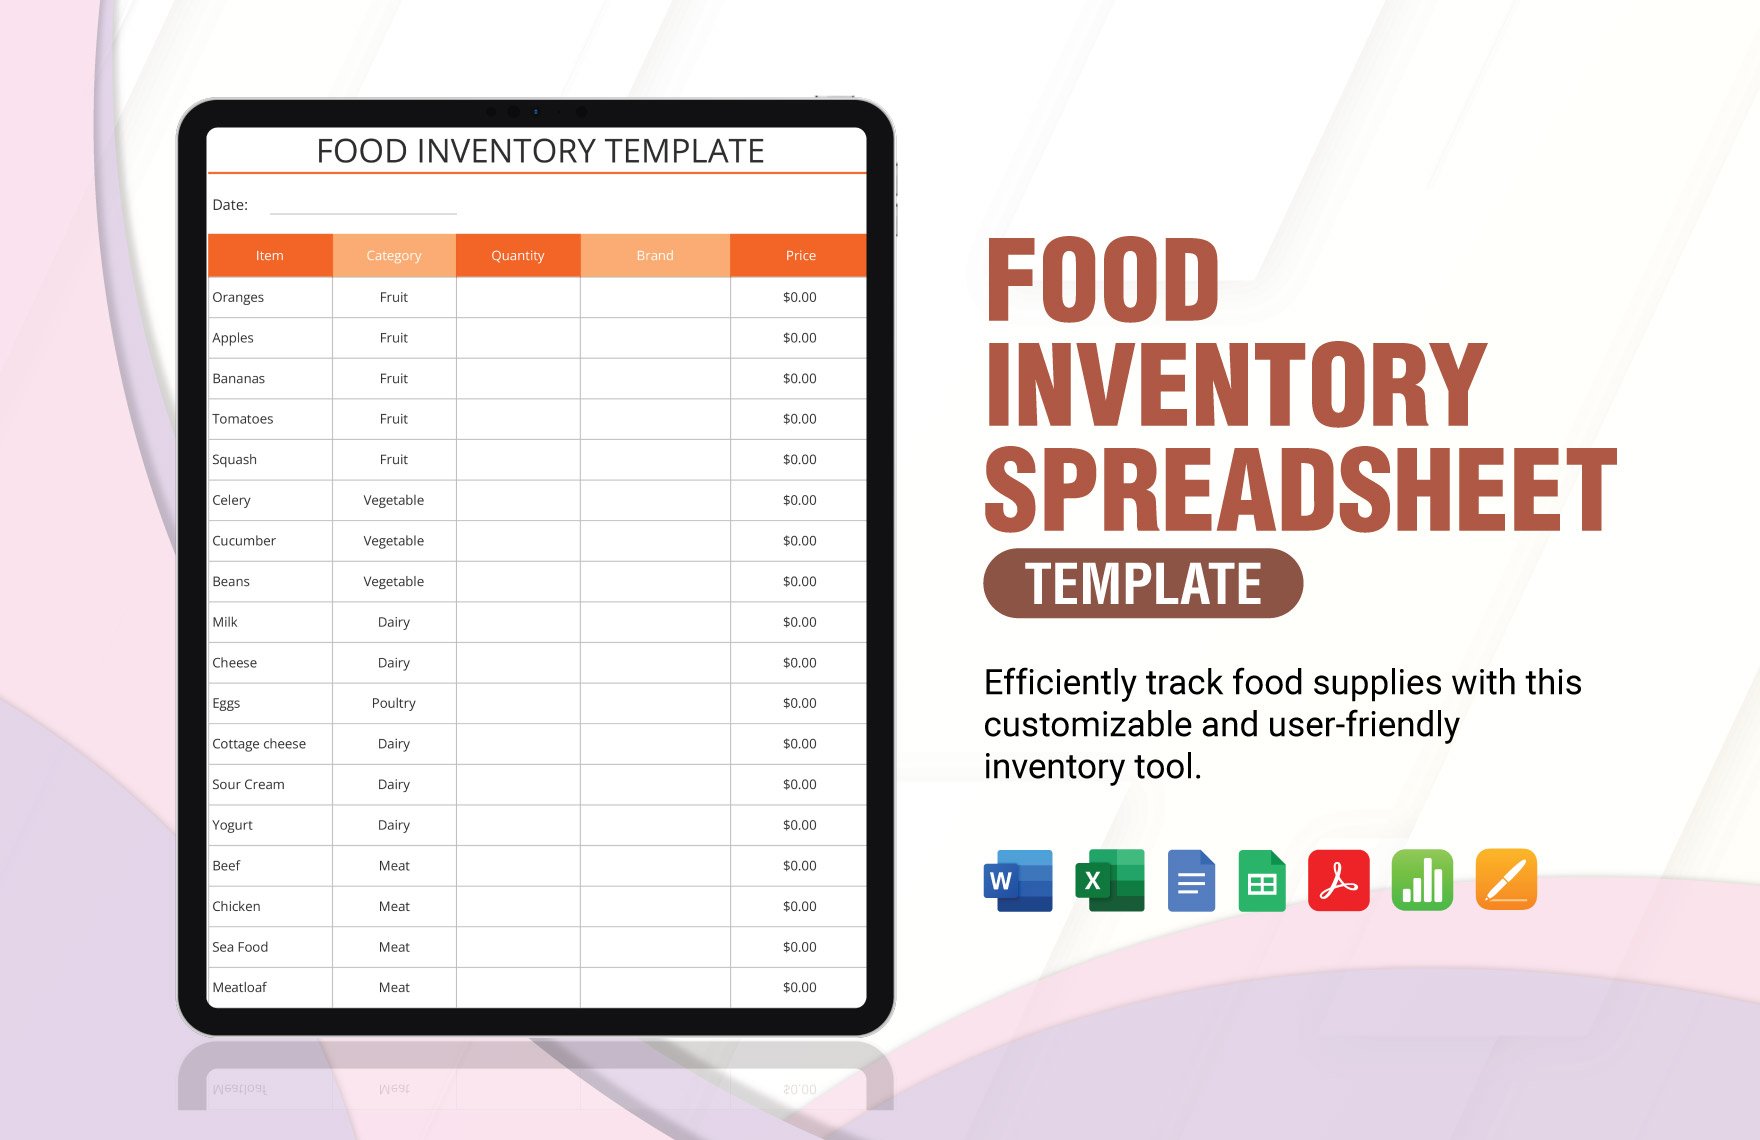 Food Inventory Spreadsheet Template in Word, Google Docs, Excel, PDF, Google Sheets, Apple Pages, Apple Numbers